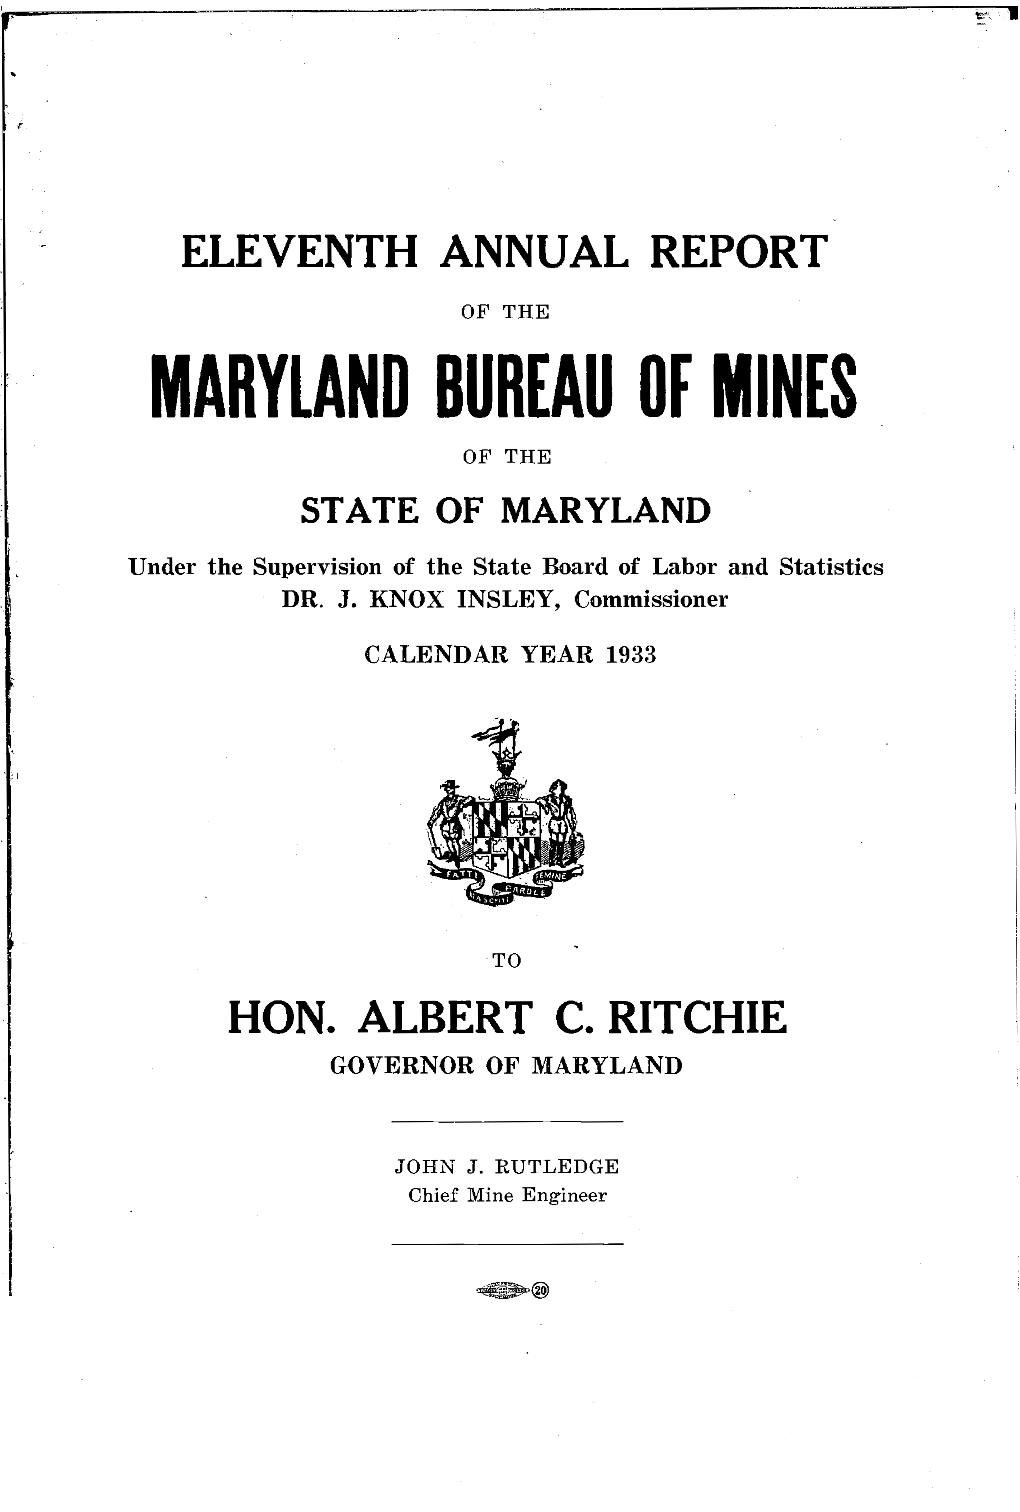 Hon. Albert C. Ritchie Governor of Maryland